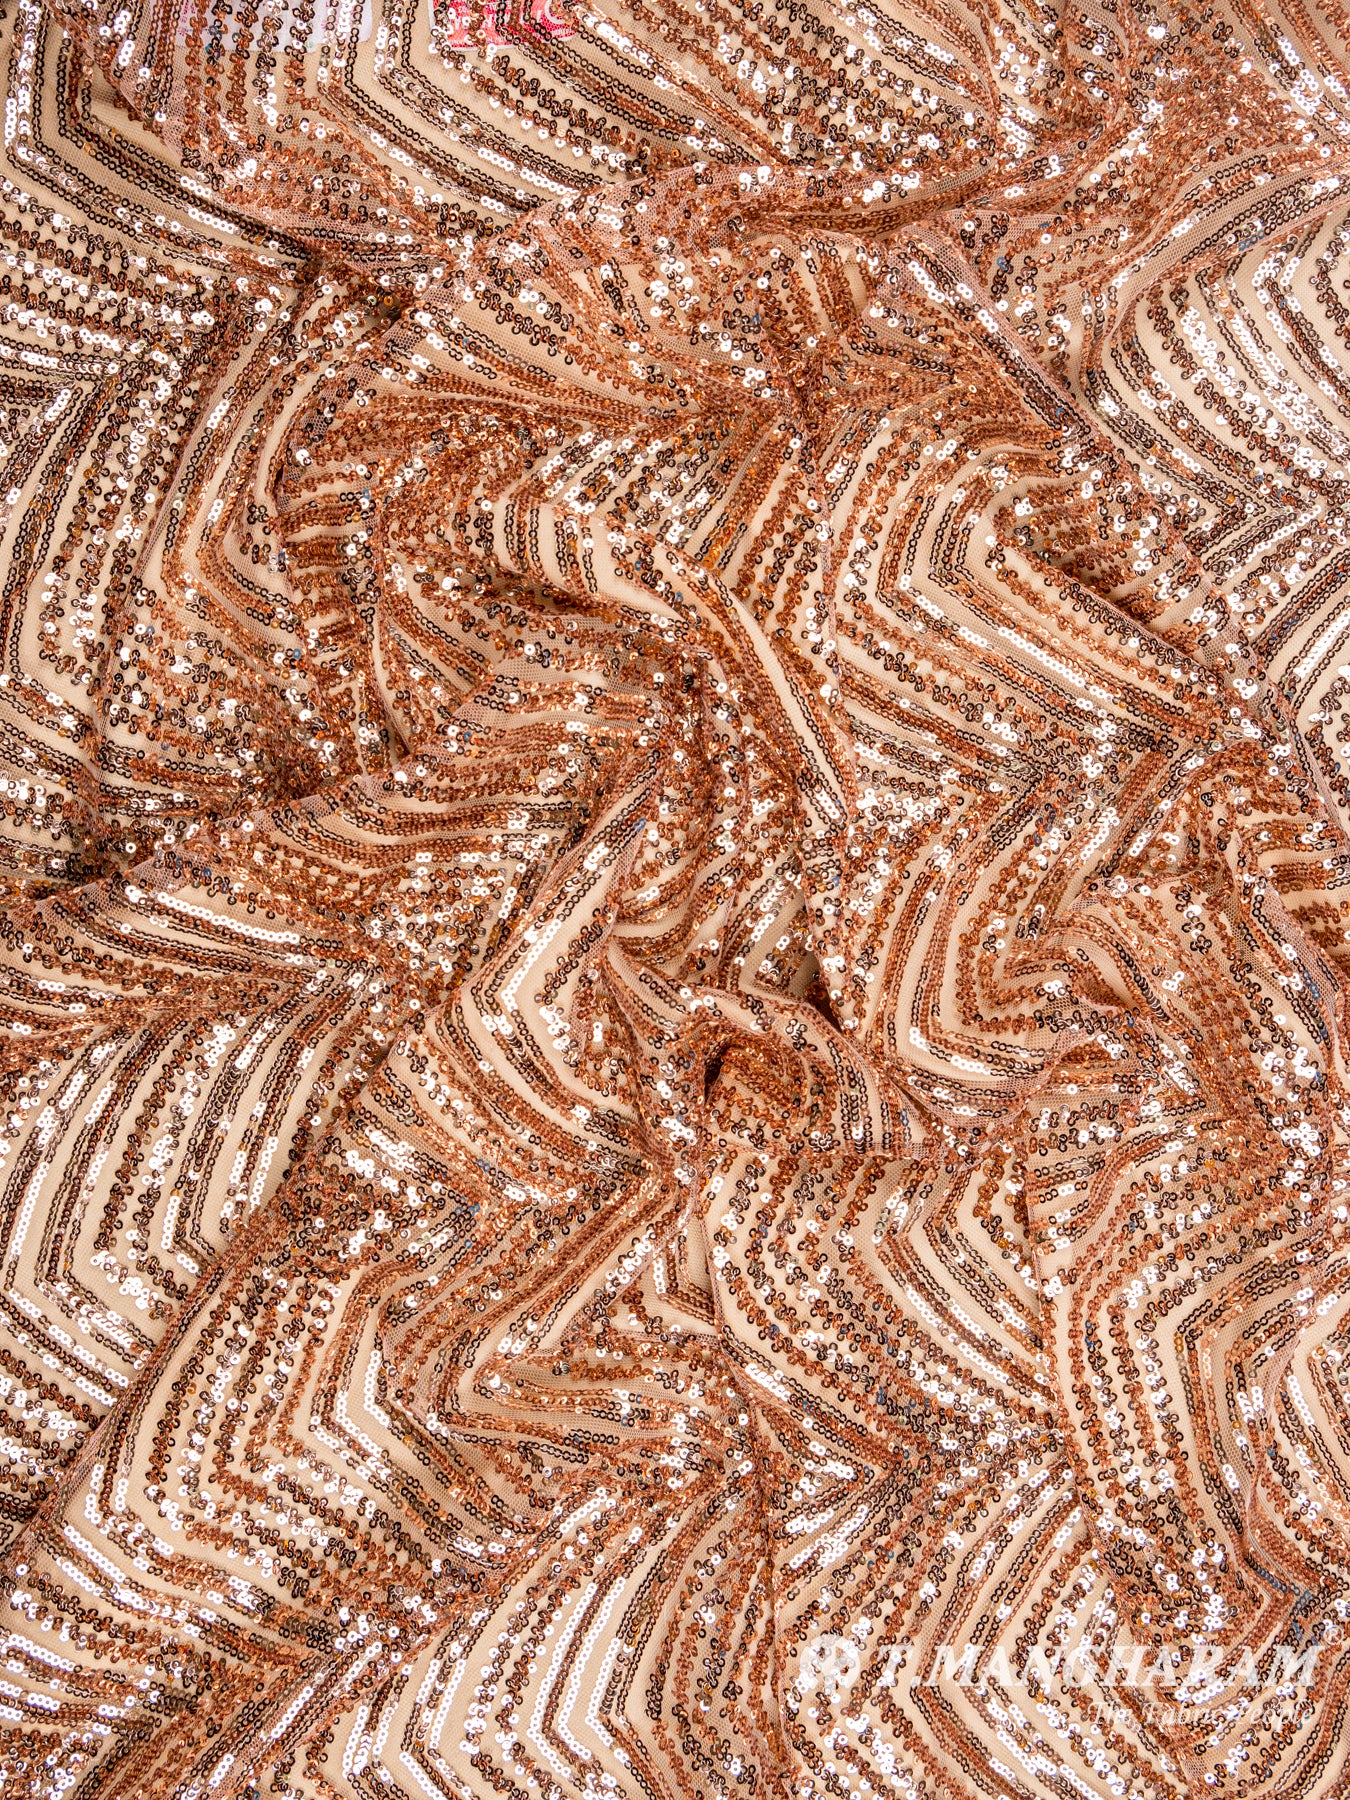 Rose Gold Sequin Net Fabric - EA1668 view-4